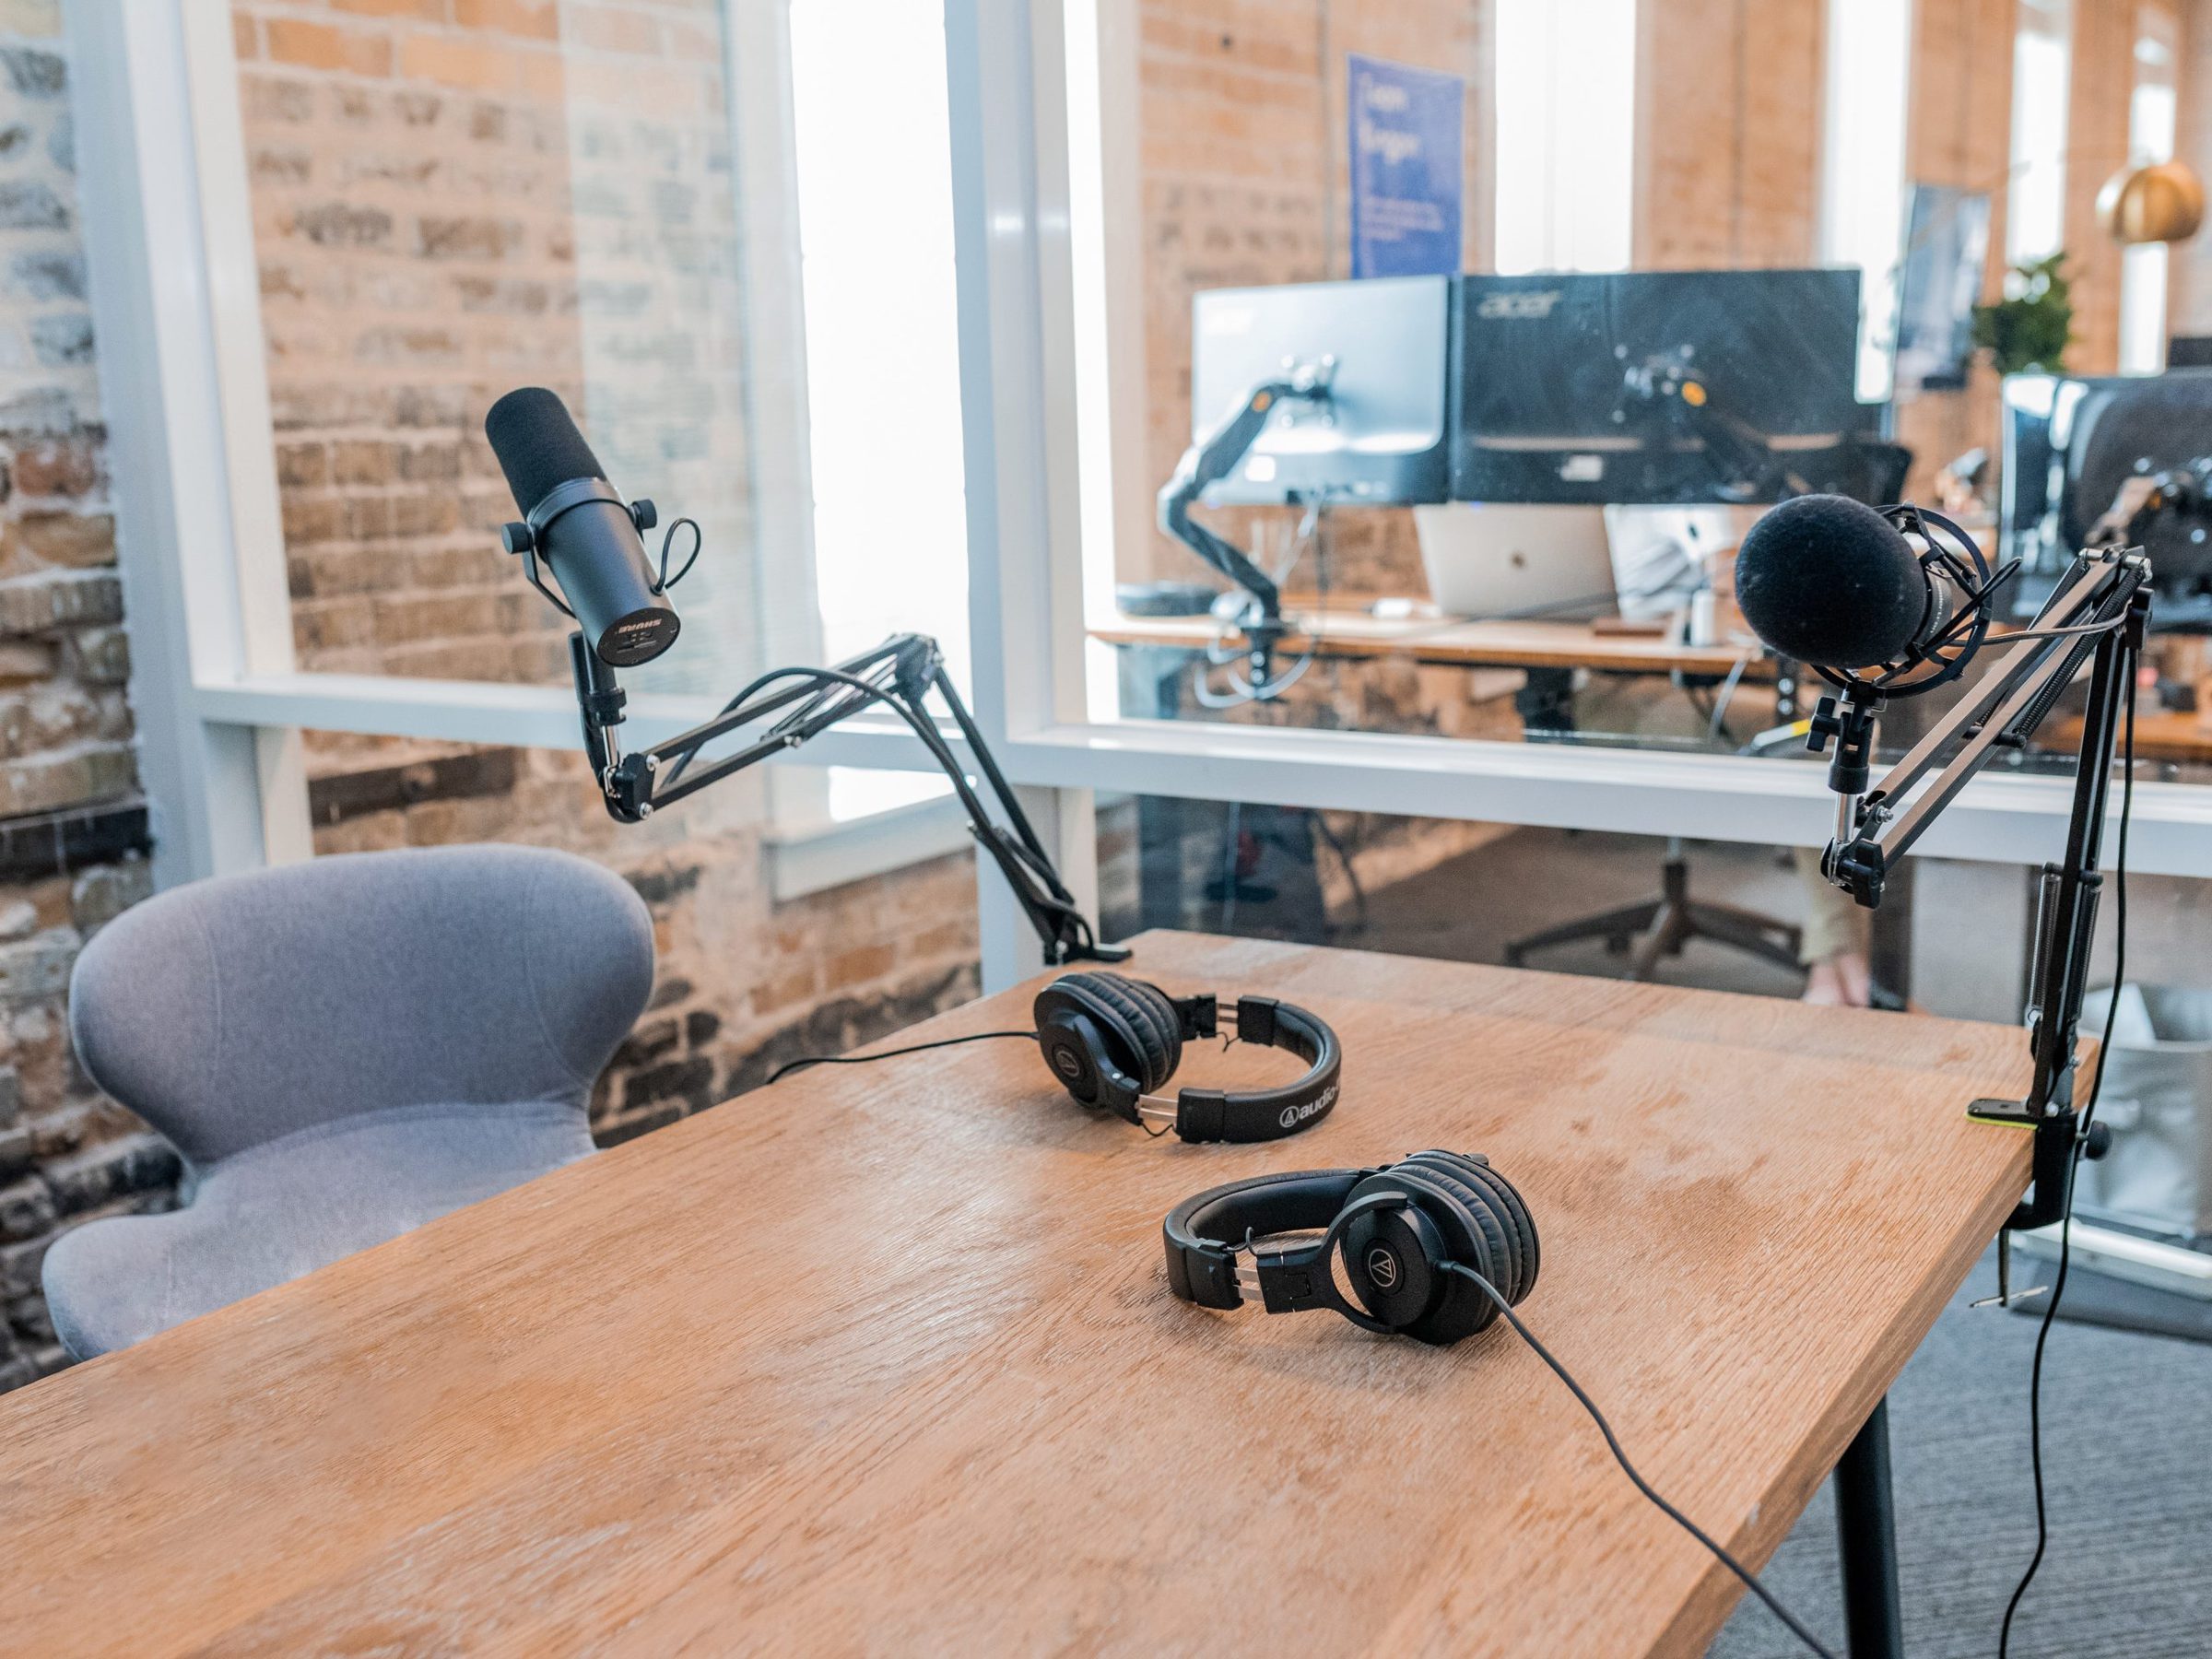 Why Podcasts Are One of the Best Ways to Market Yourself